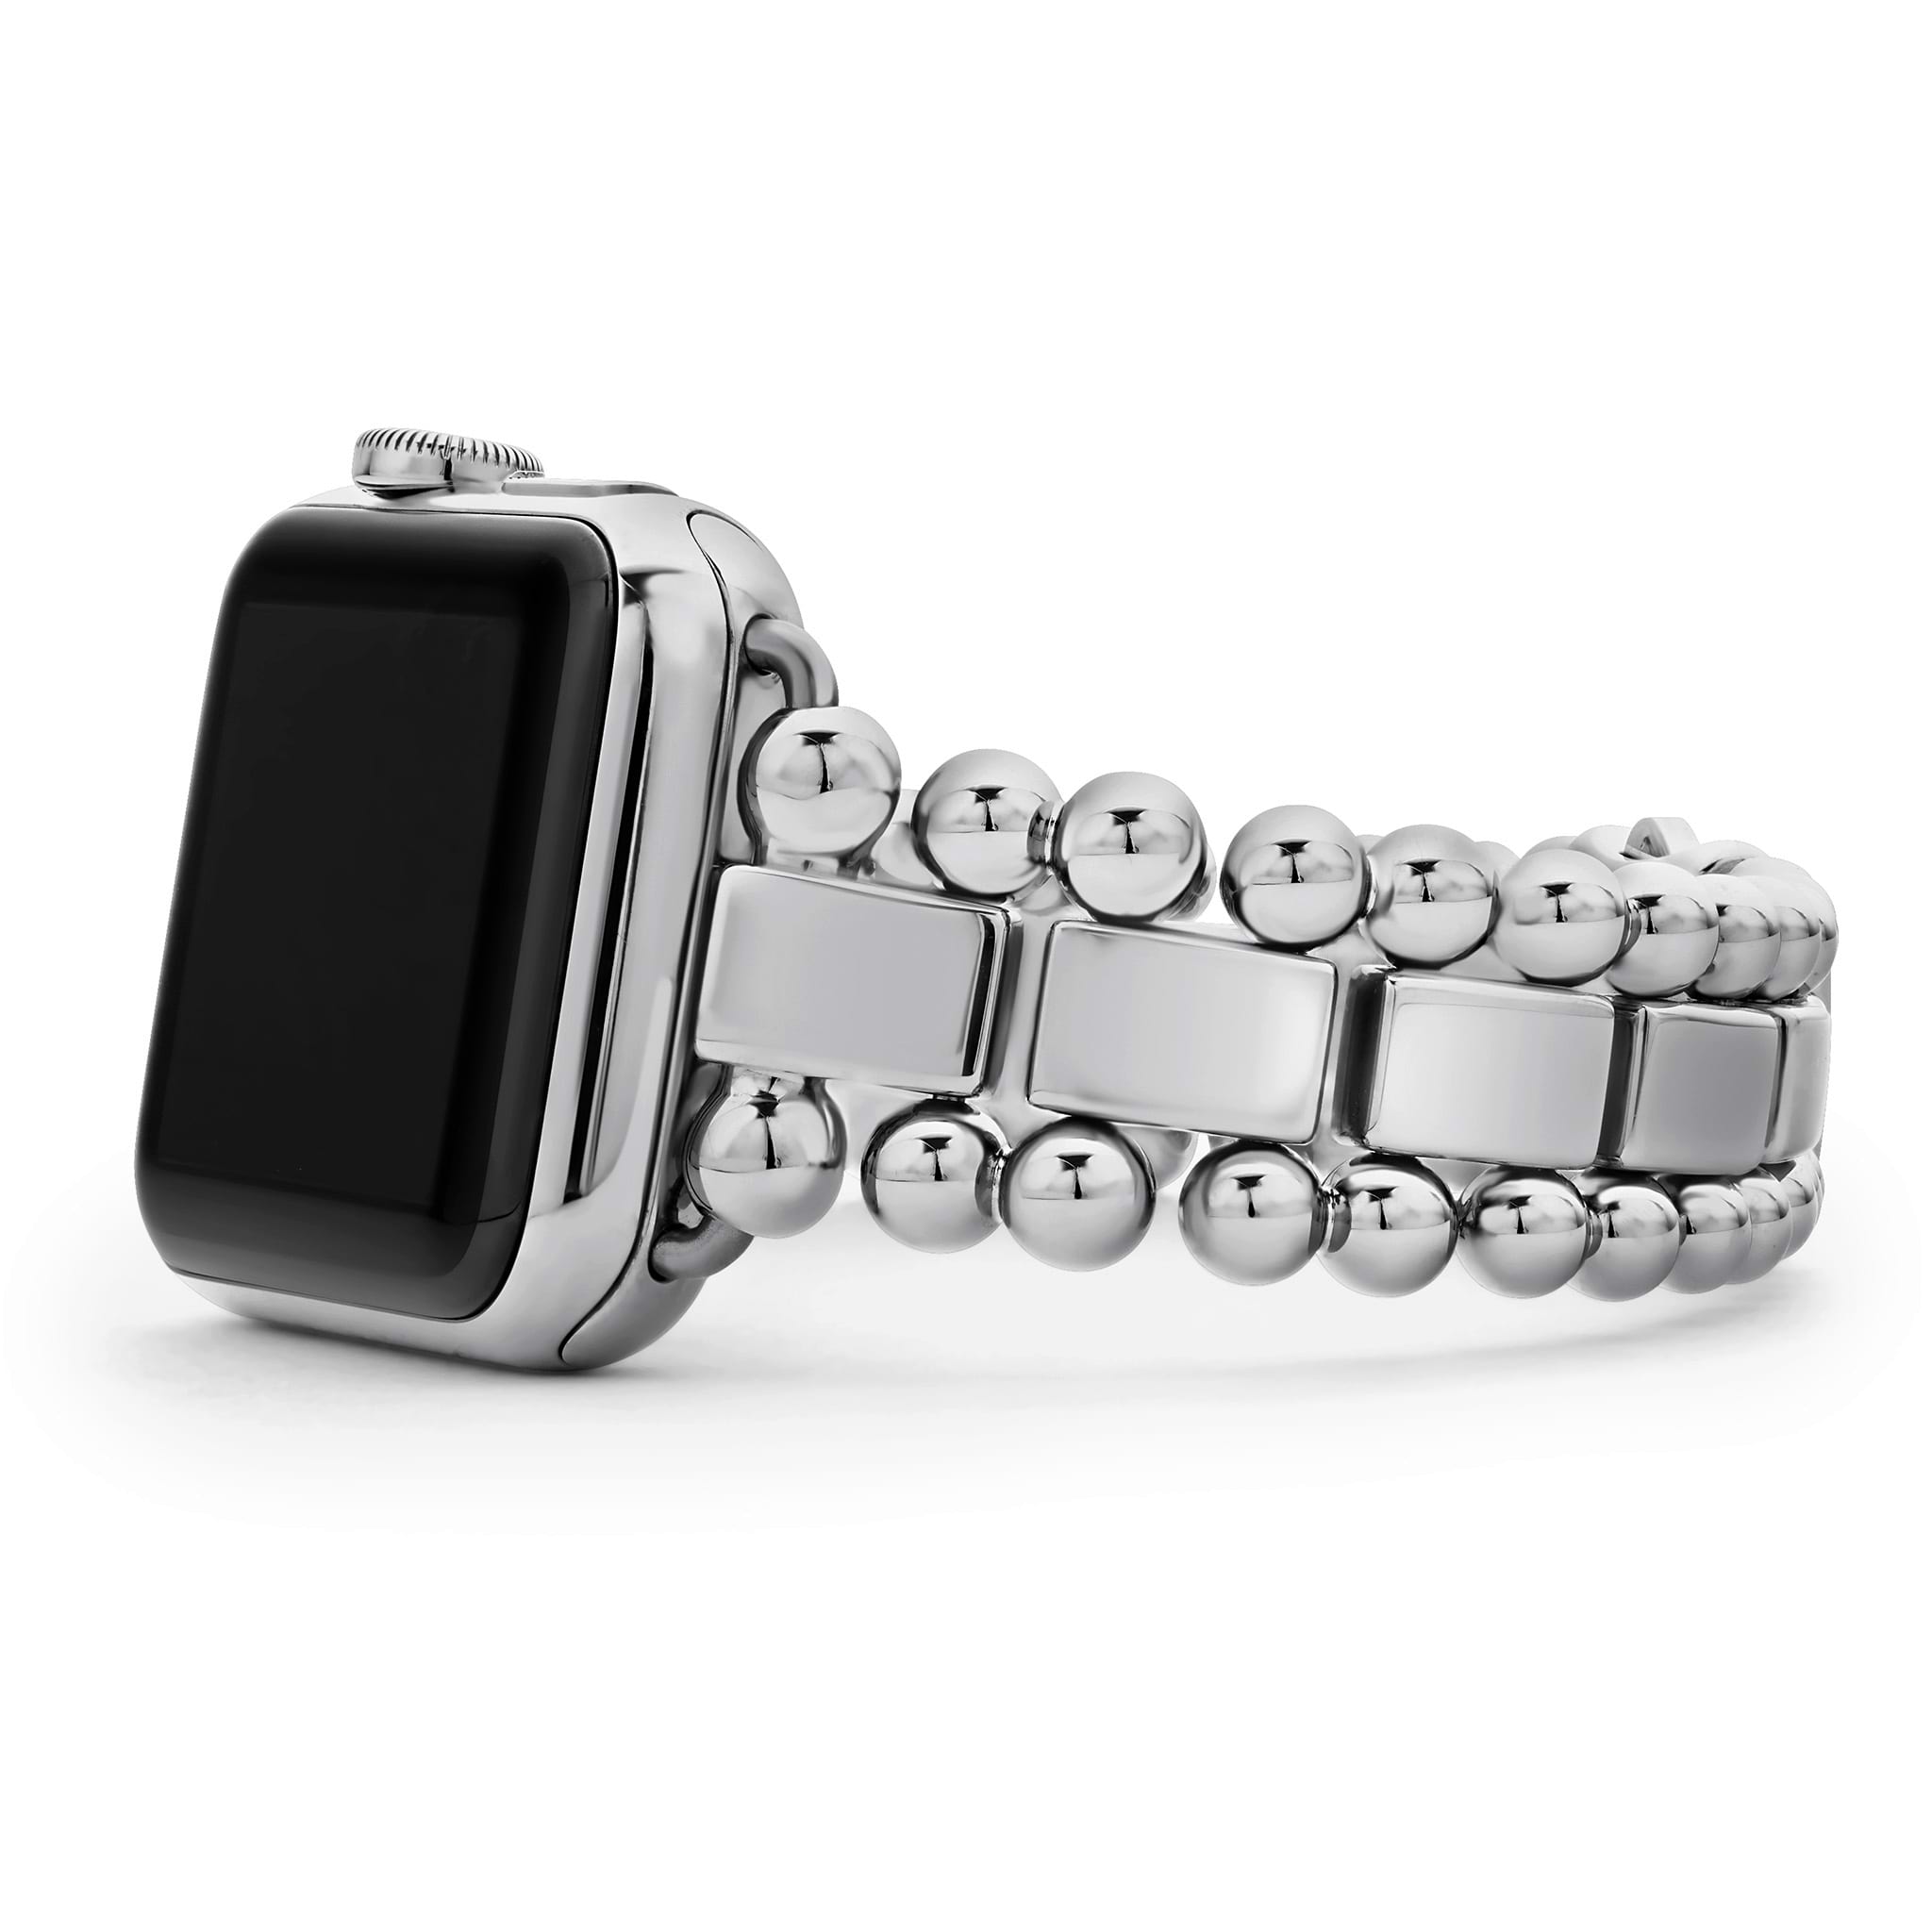 Gray Stud Band for the Apple Watch - FINAL SALE